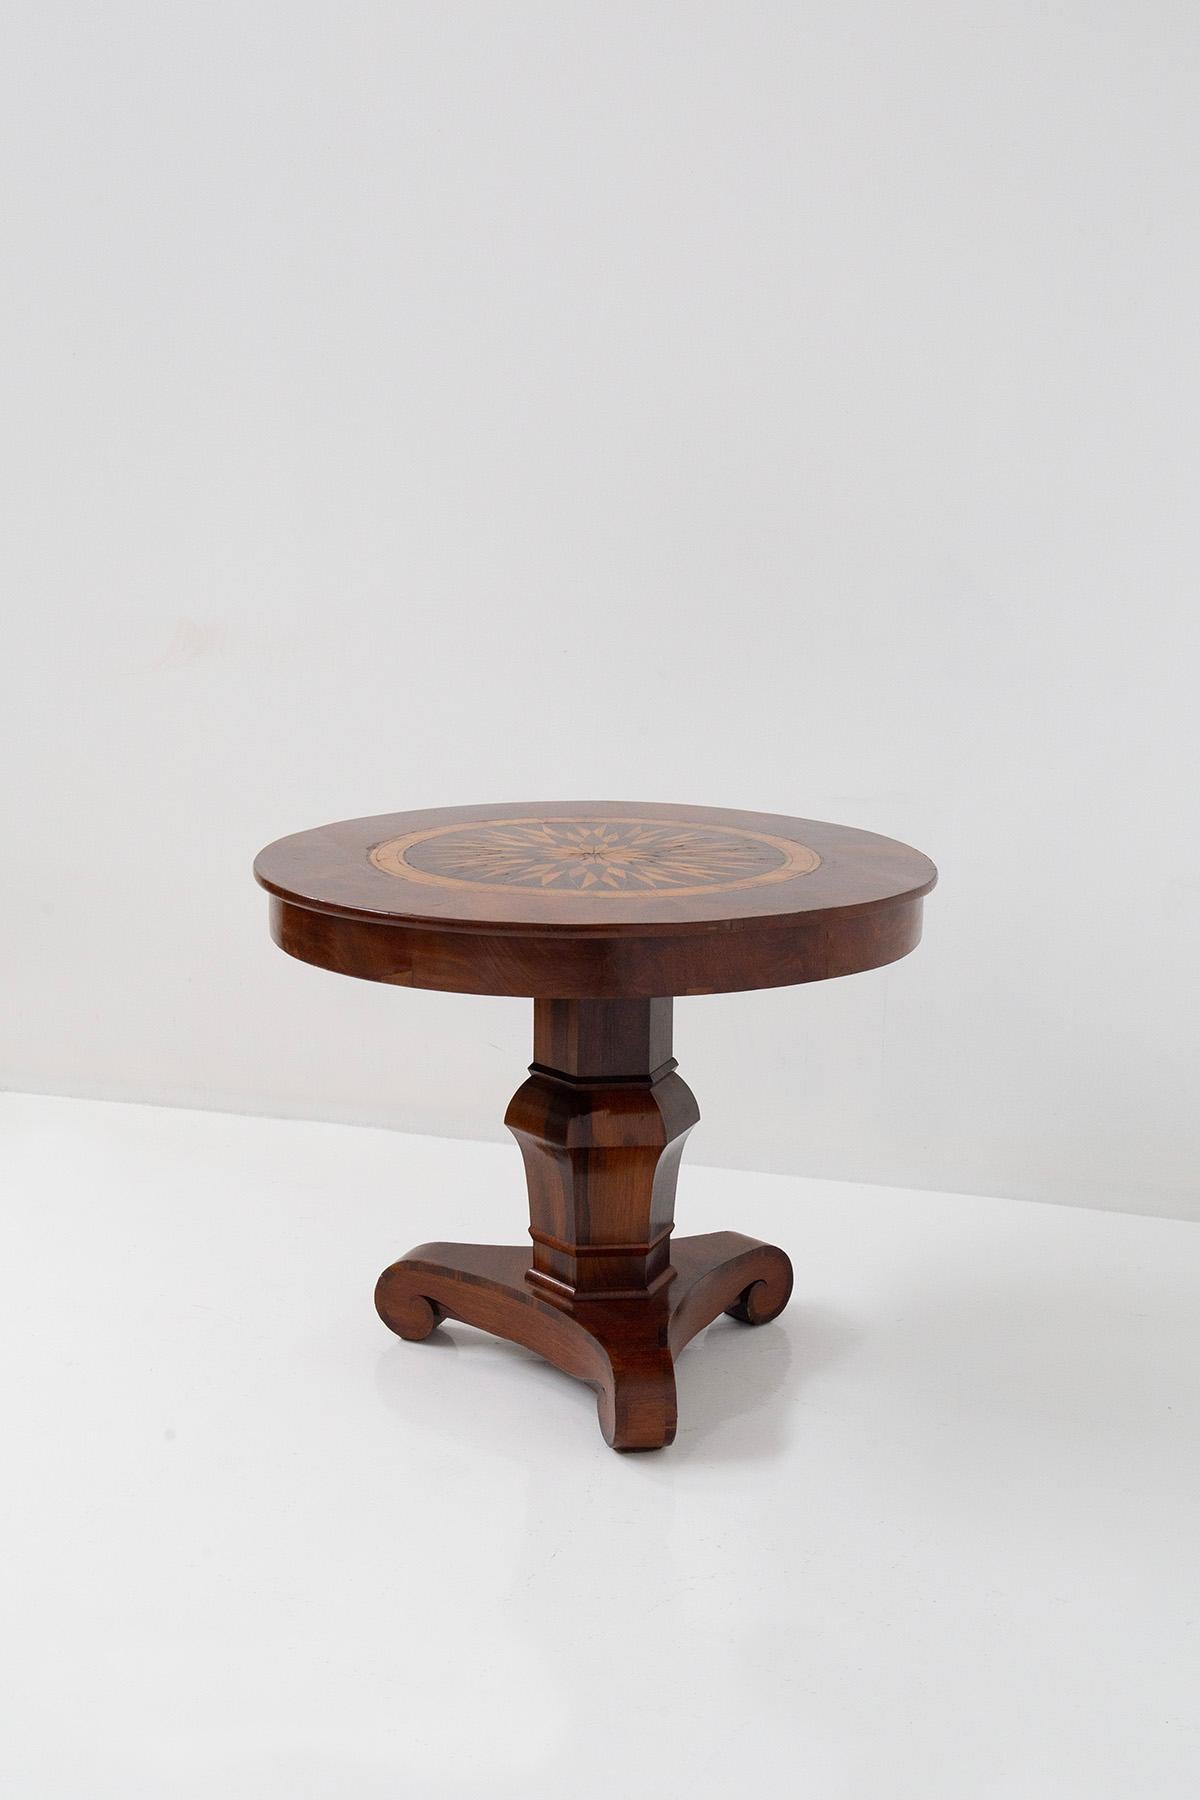 Presenting an elegant and antique French round table, dating back to the 1800s. This remarkable piece exhibits exquisite and valuable features that add a touch of sophistication to any space.
The round table top showcases intricate inlays in